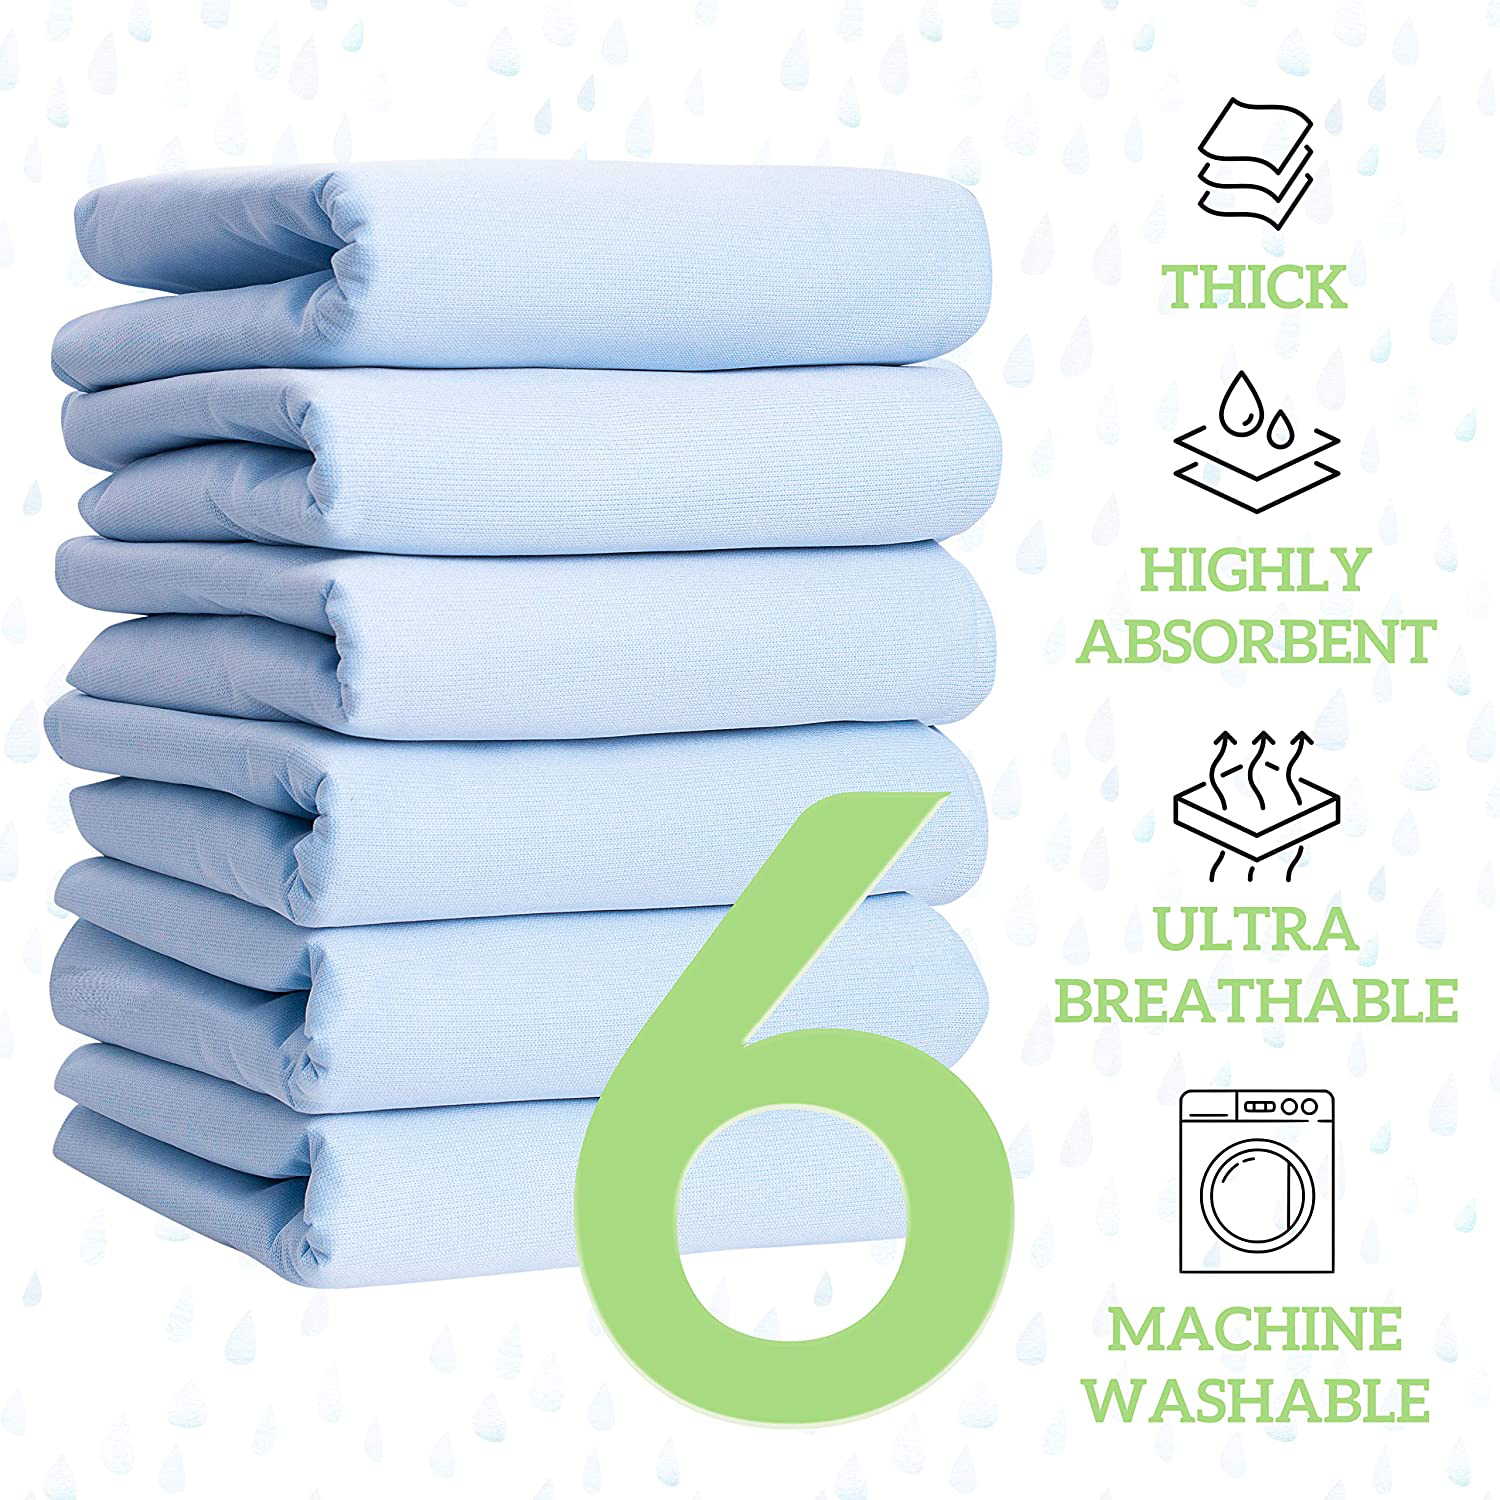 GREEN LIFESTYLE Washable Underpads, Pack - of 6 Large Bed Pads, 34" X 36", for Use as Incontinence Bed Pads, Reusable Pet Pads, Great for Dogs, Cats, Bunny & Seniors (6 Pack - 34X36)